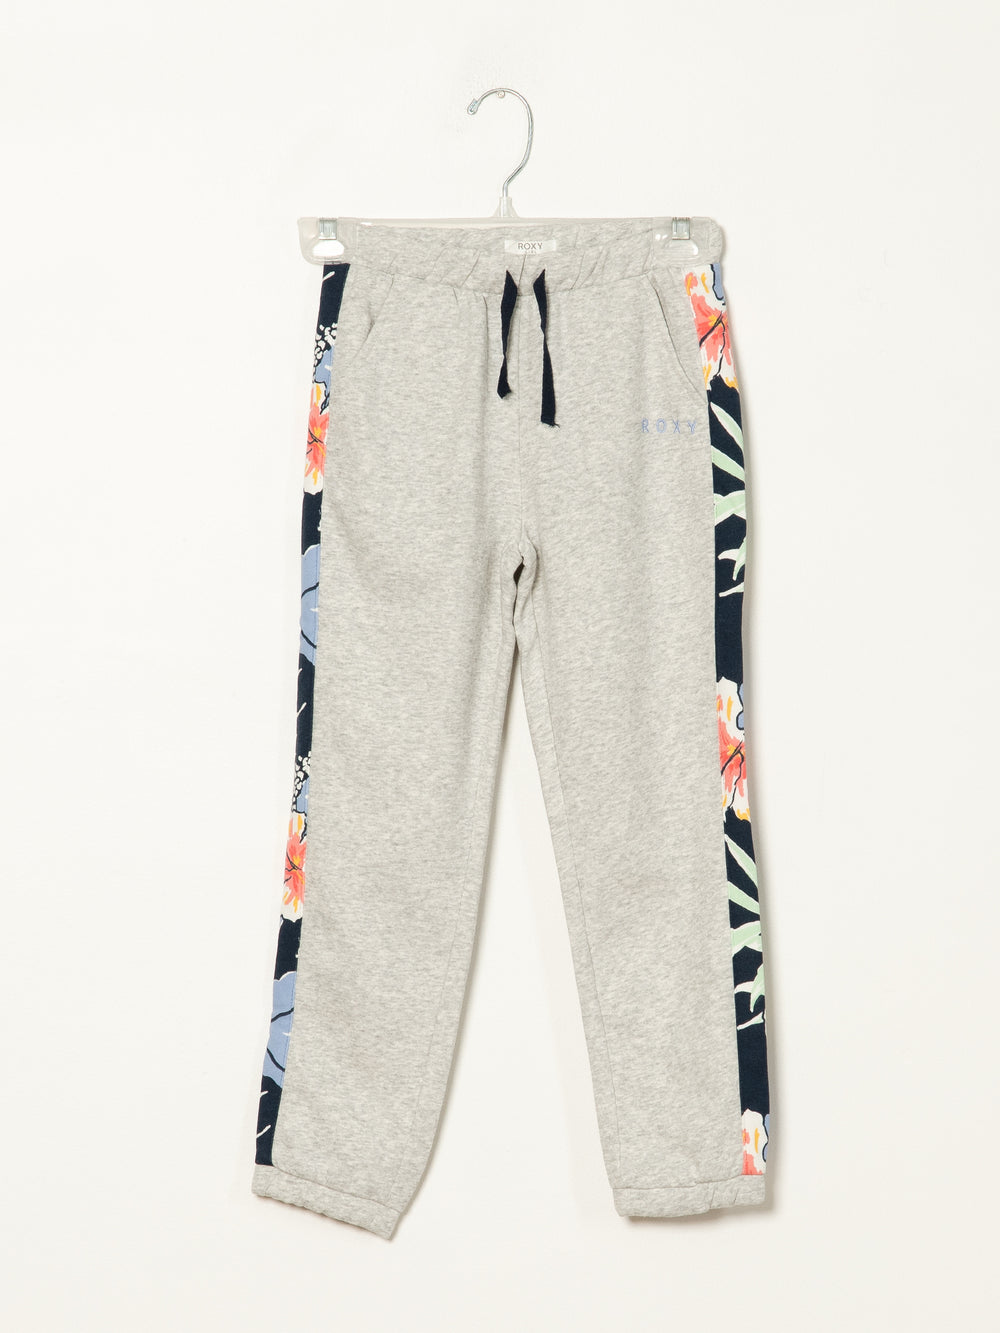 ROXY YOUTH GIRLS WHAT A TIME SWEATPANT  - CLEARANCE